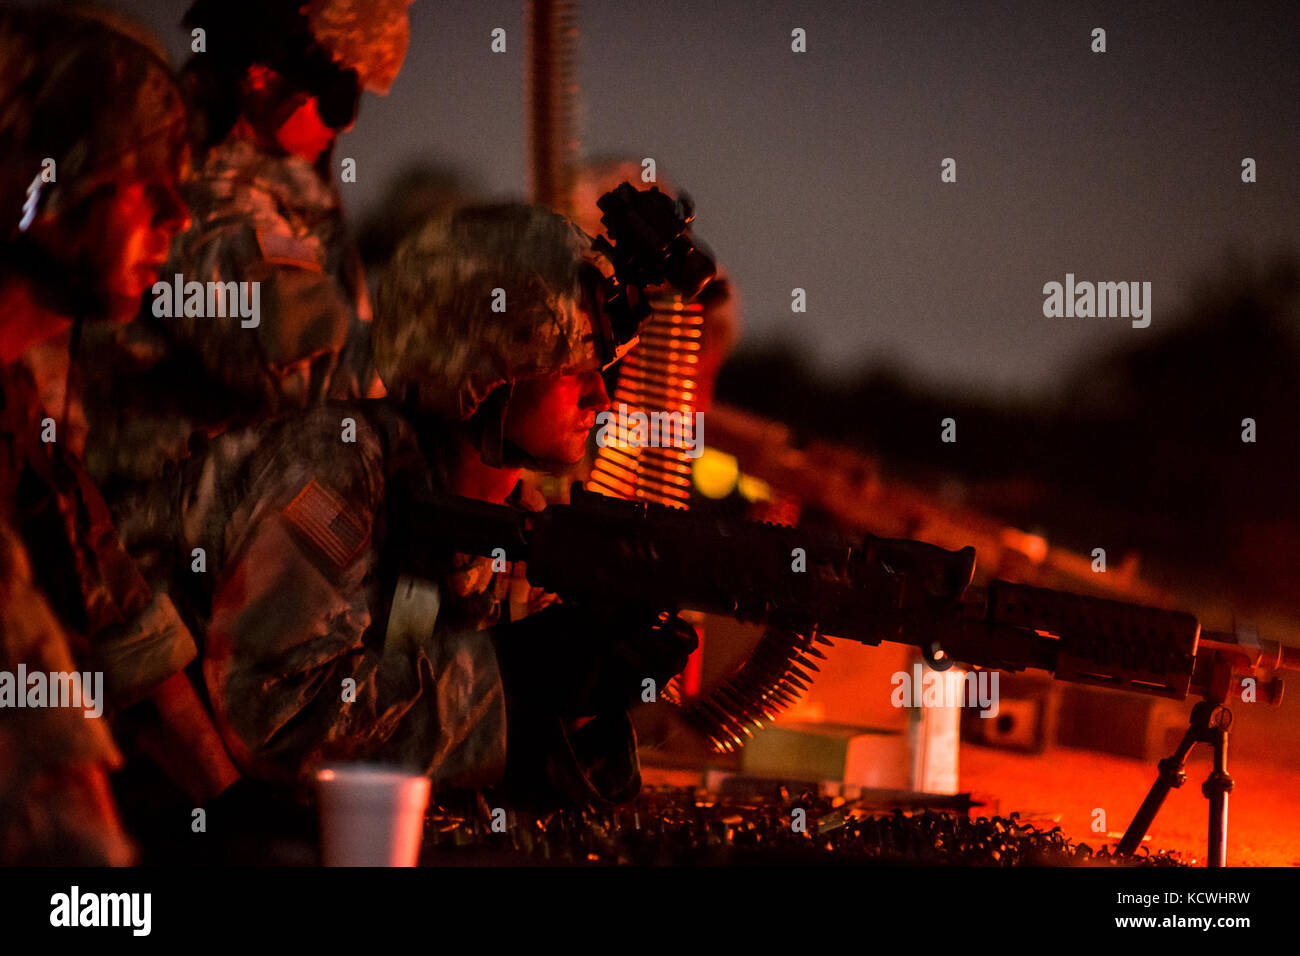 U.S. Army Spc. Edward Carr, combat engineer assigned to the 218th Maneuver Enhancement Brigade, S.C. Army National Guard fires a M240B machine gun during the crew-served weapons familiarization night training at Fort Jackson, S.C., Sept. 15, 2016.  Carr is assisting in the training of 30 Soldiers from multiple transportation and signal companies on dismounted security drills and crew-served weapons in preparation for their qualification next summer and to stay current with convoy security. (U.S. Air National Guard photo by Tech. Sgt. Jorge Intriago) Stock Photo